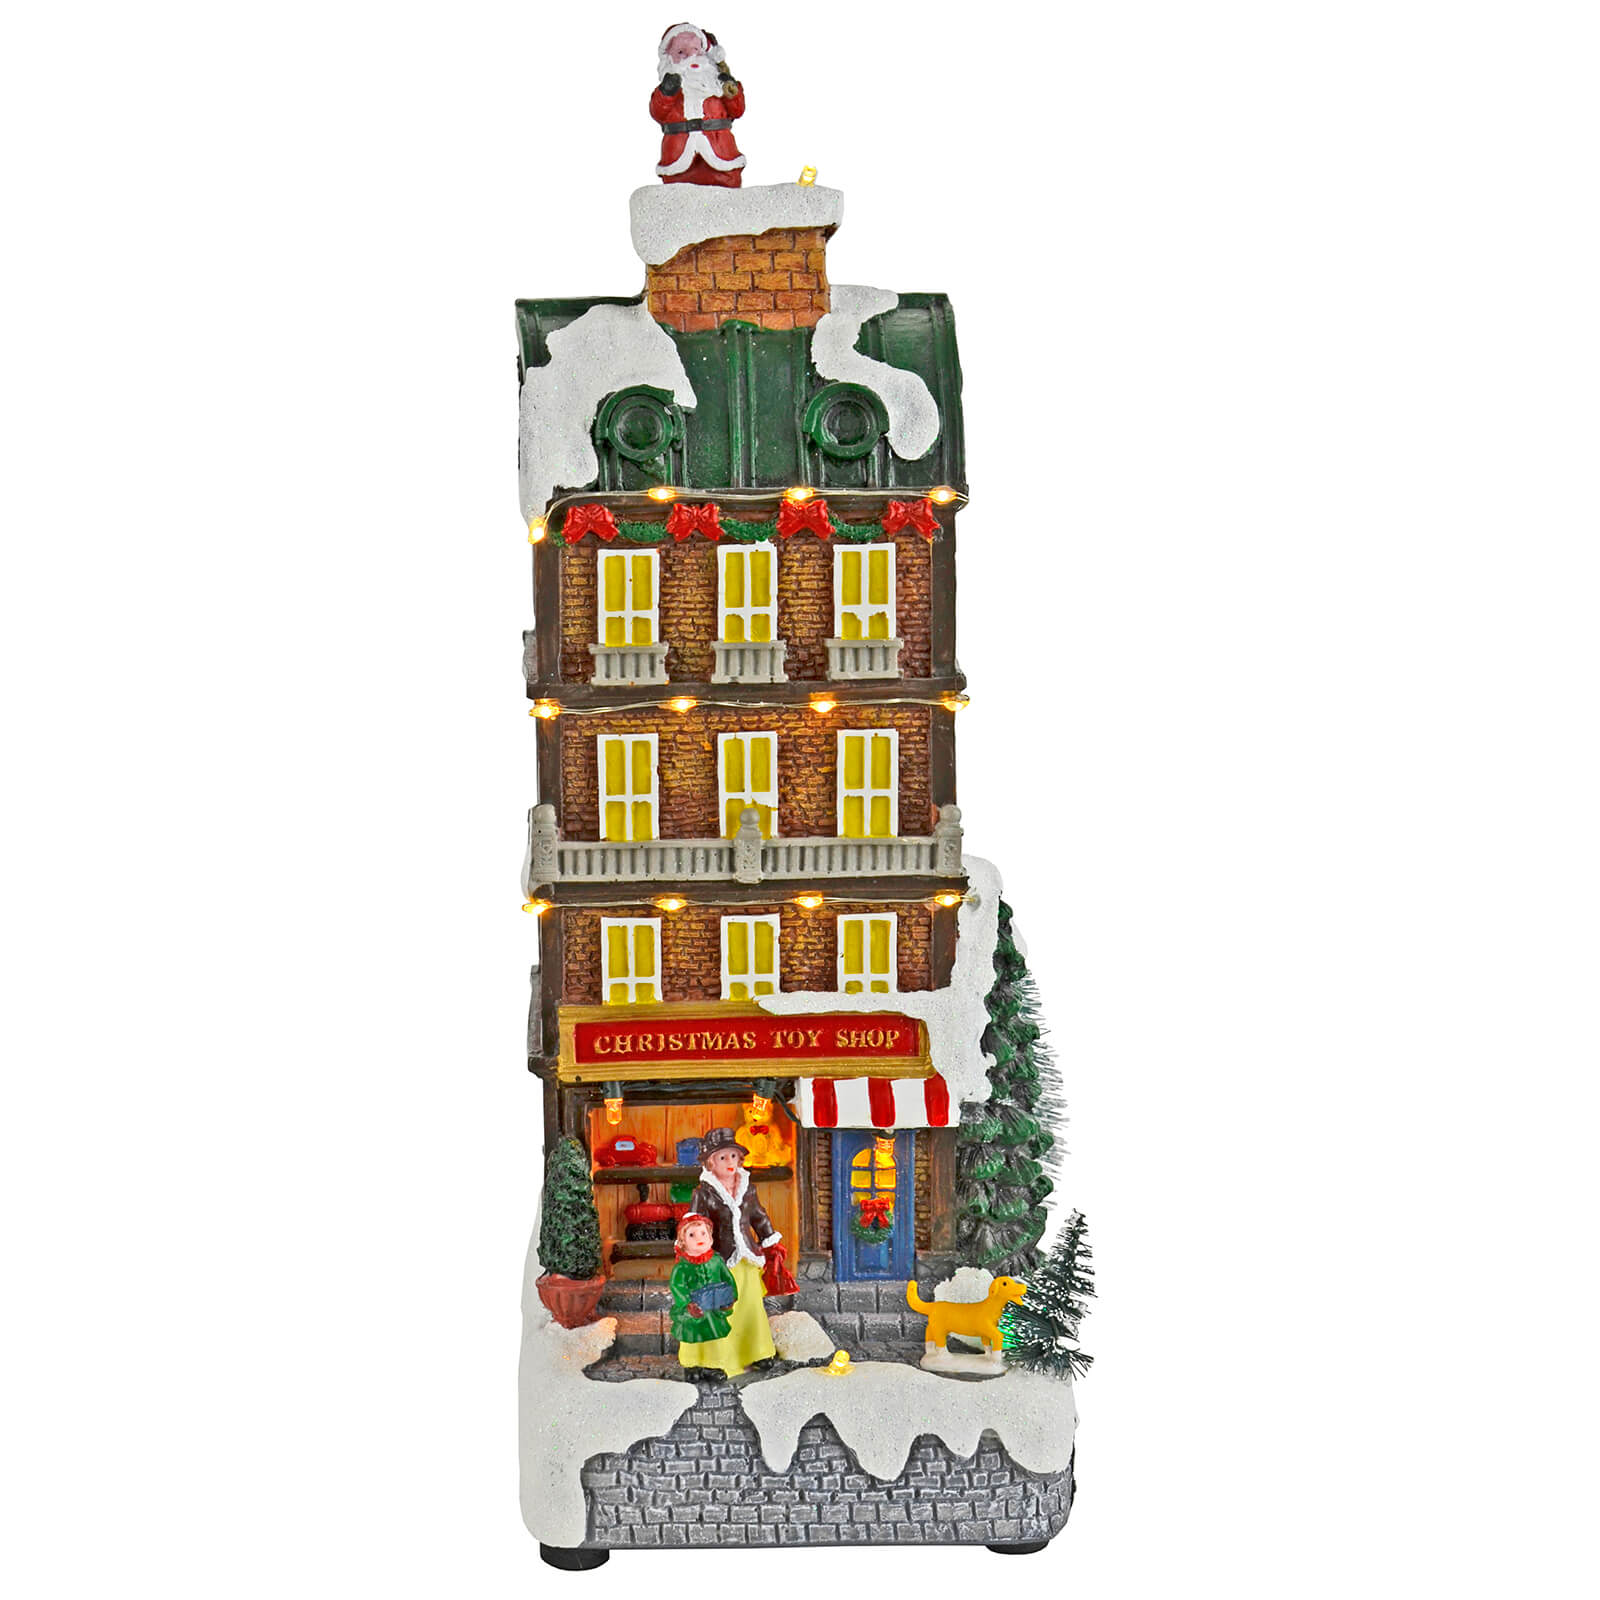 Christmas toy shop snow scene ornament with LED lights and Santa in the chimney